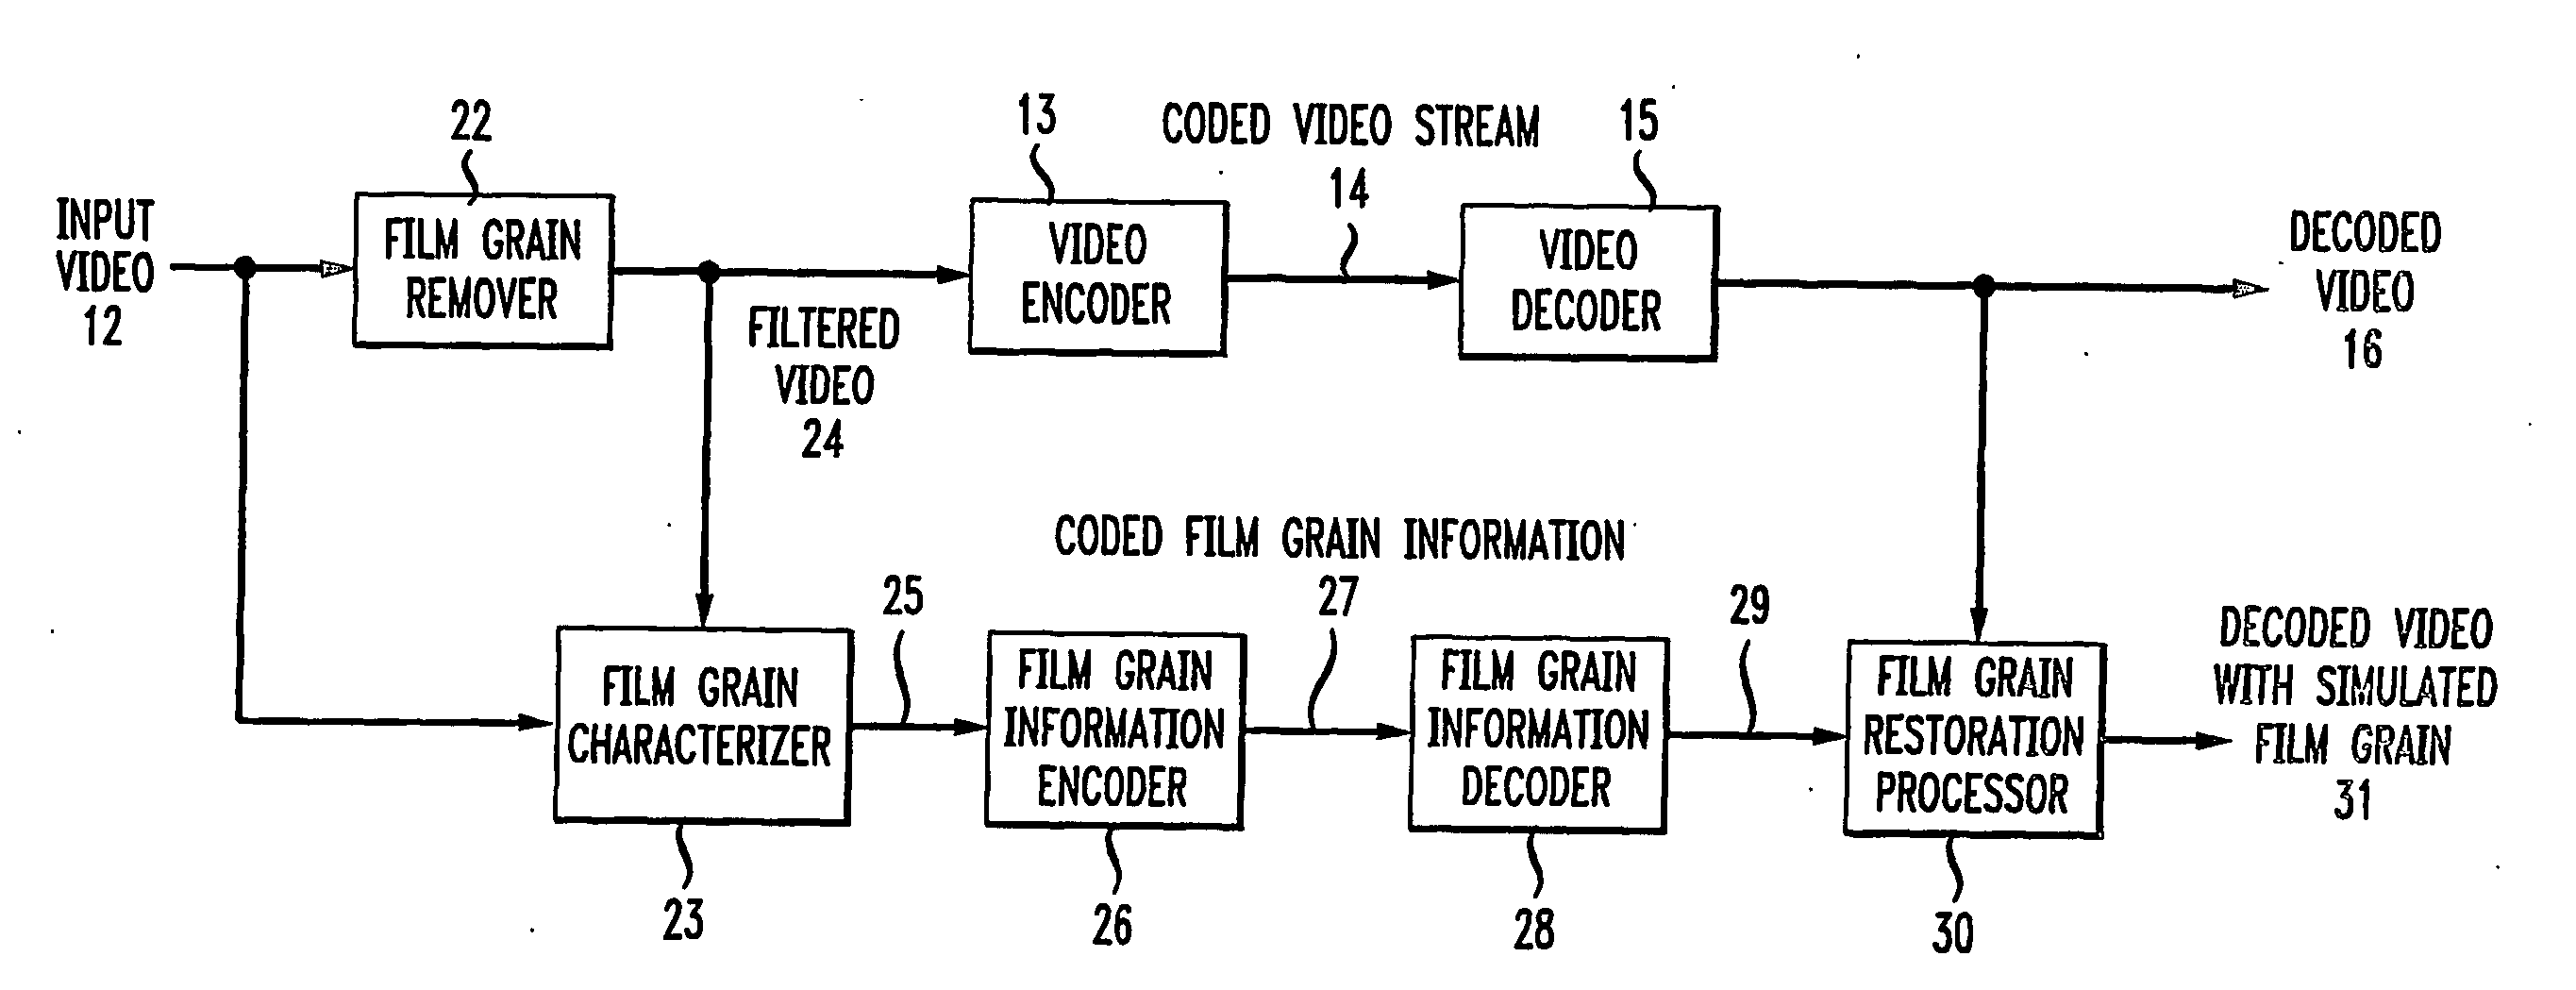 Technique for simulating film grain on encoded video